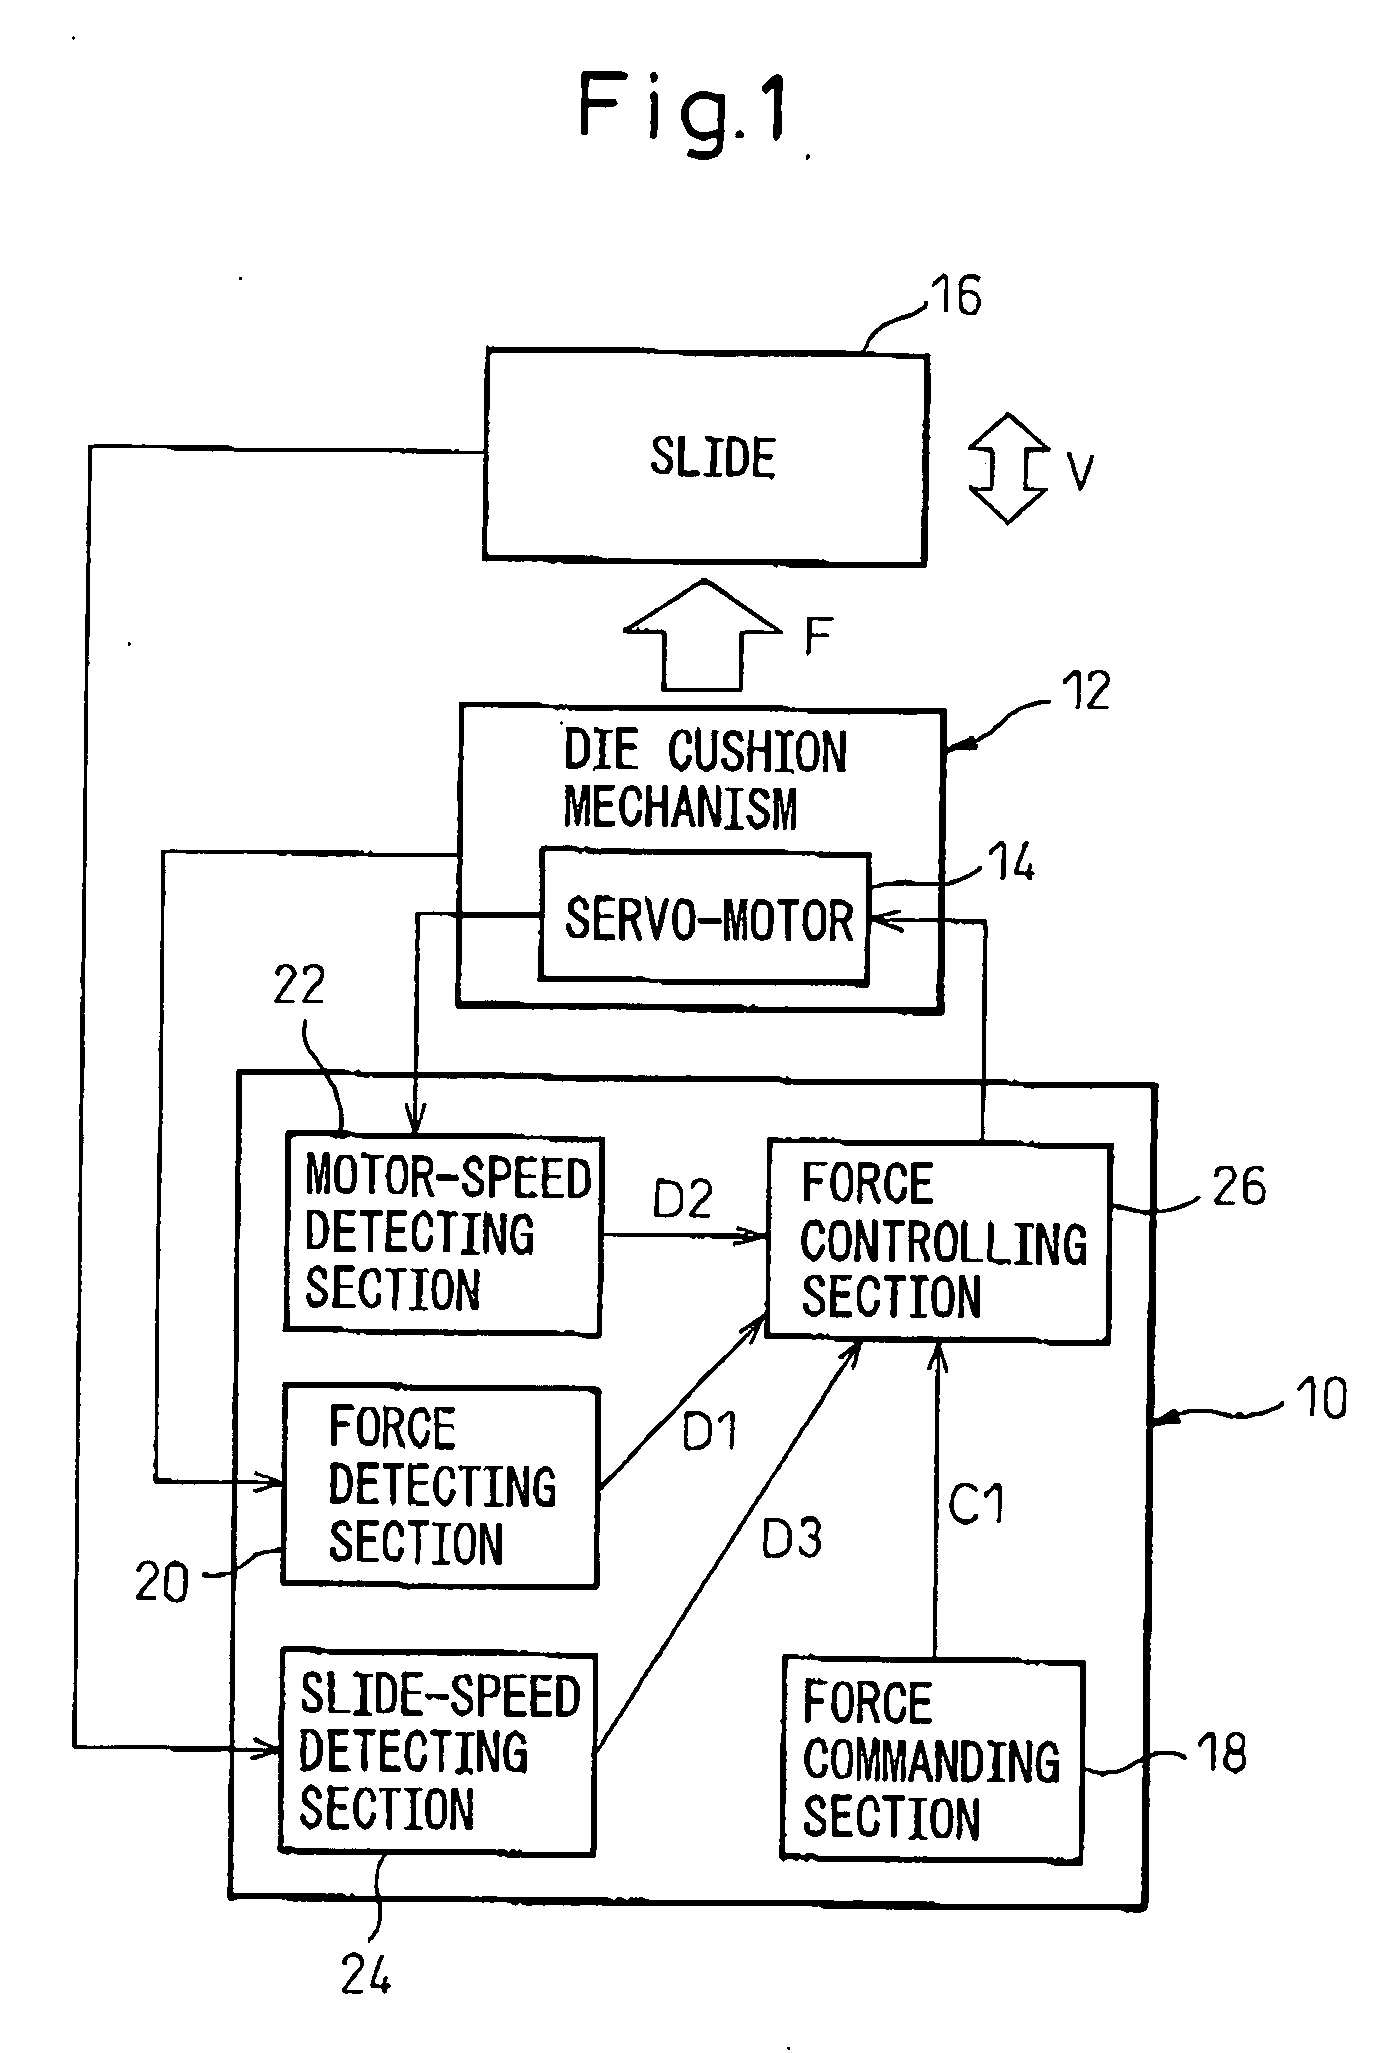 Die cushion mechanism, and apparatus and method for controlling the same